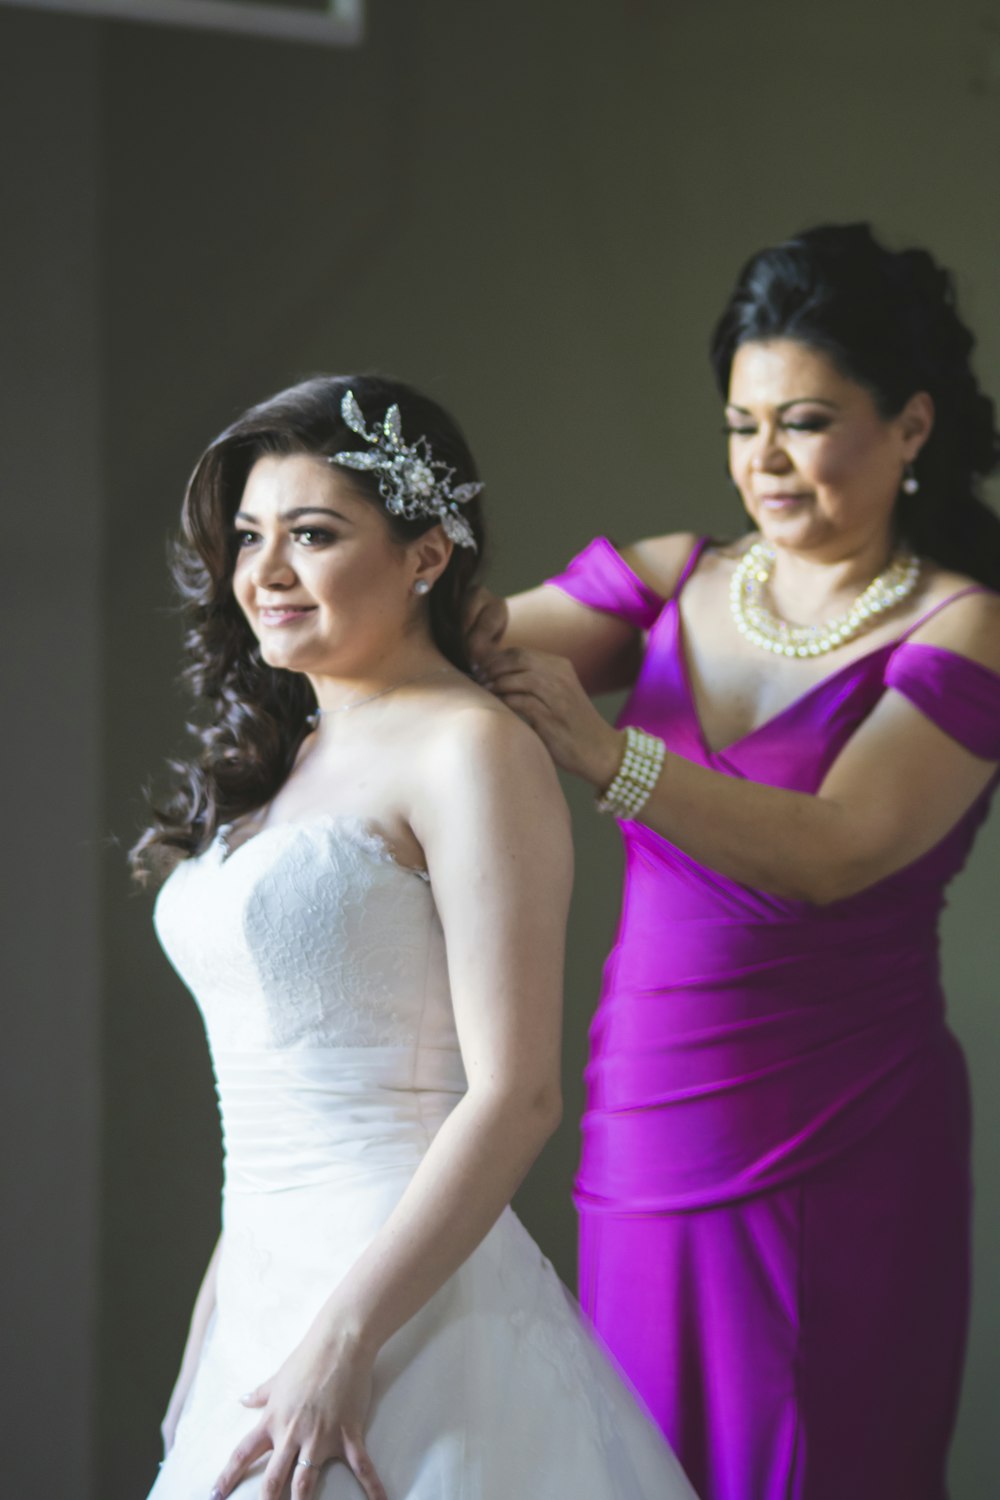 a woman in a purple dress getting ready for a wedding